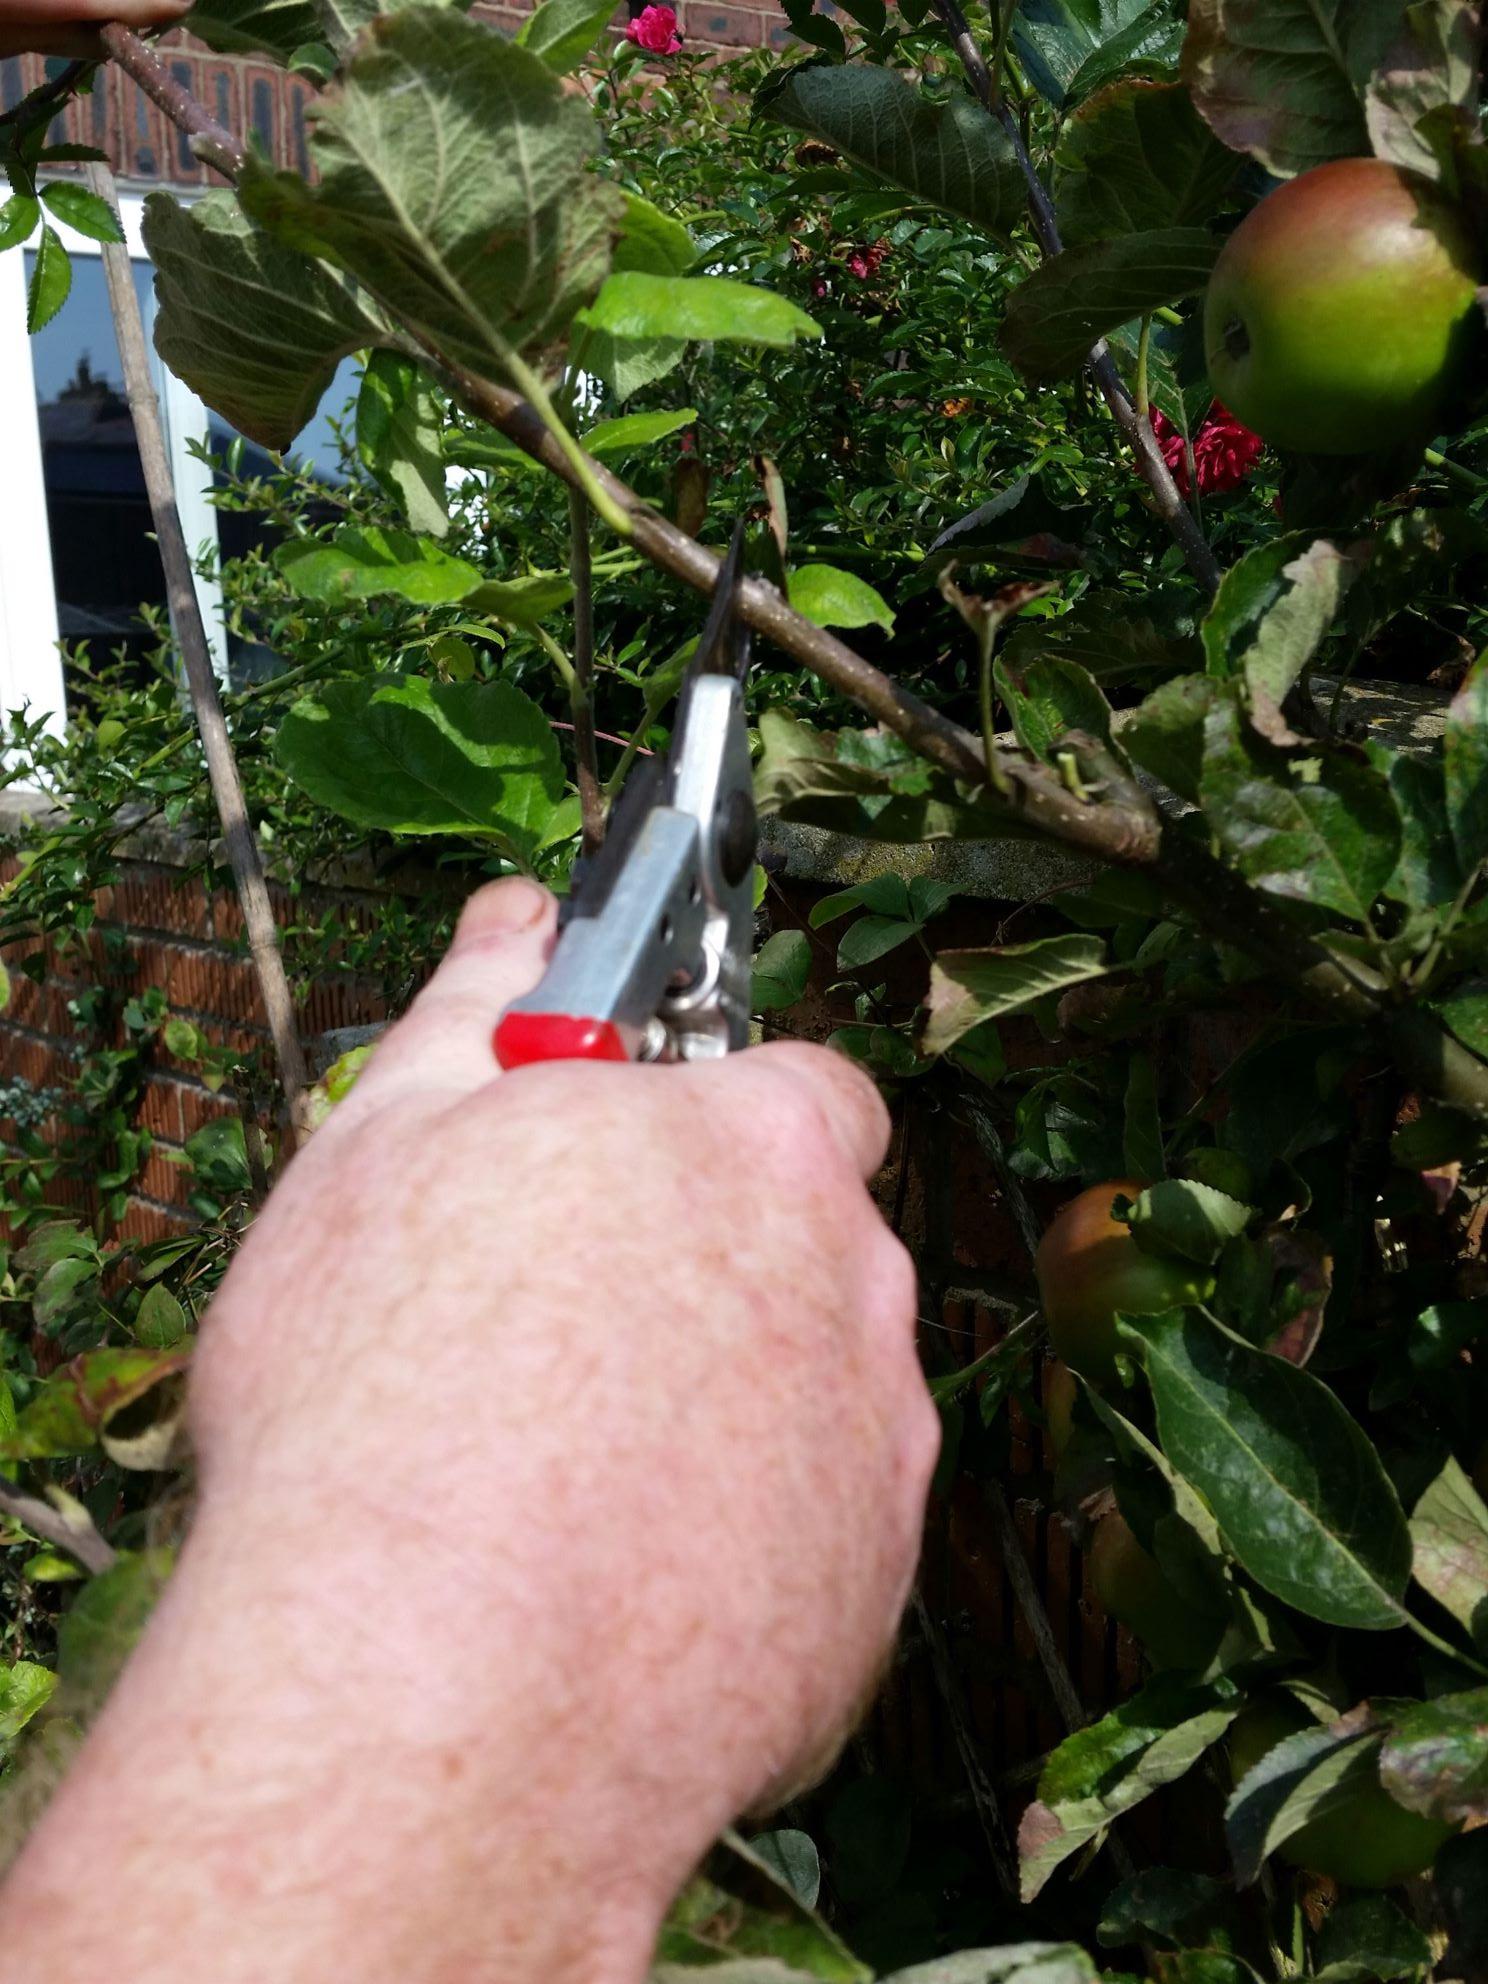 Here summer pruning to maintain the shape of this trained apple tree